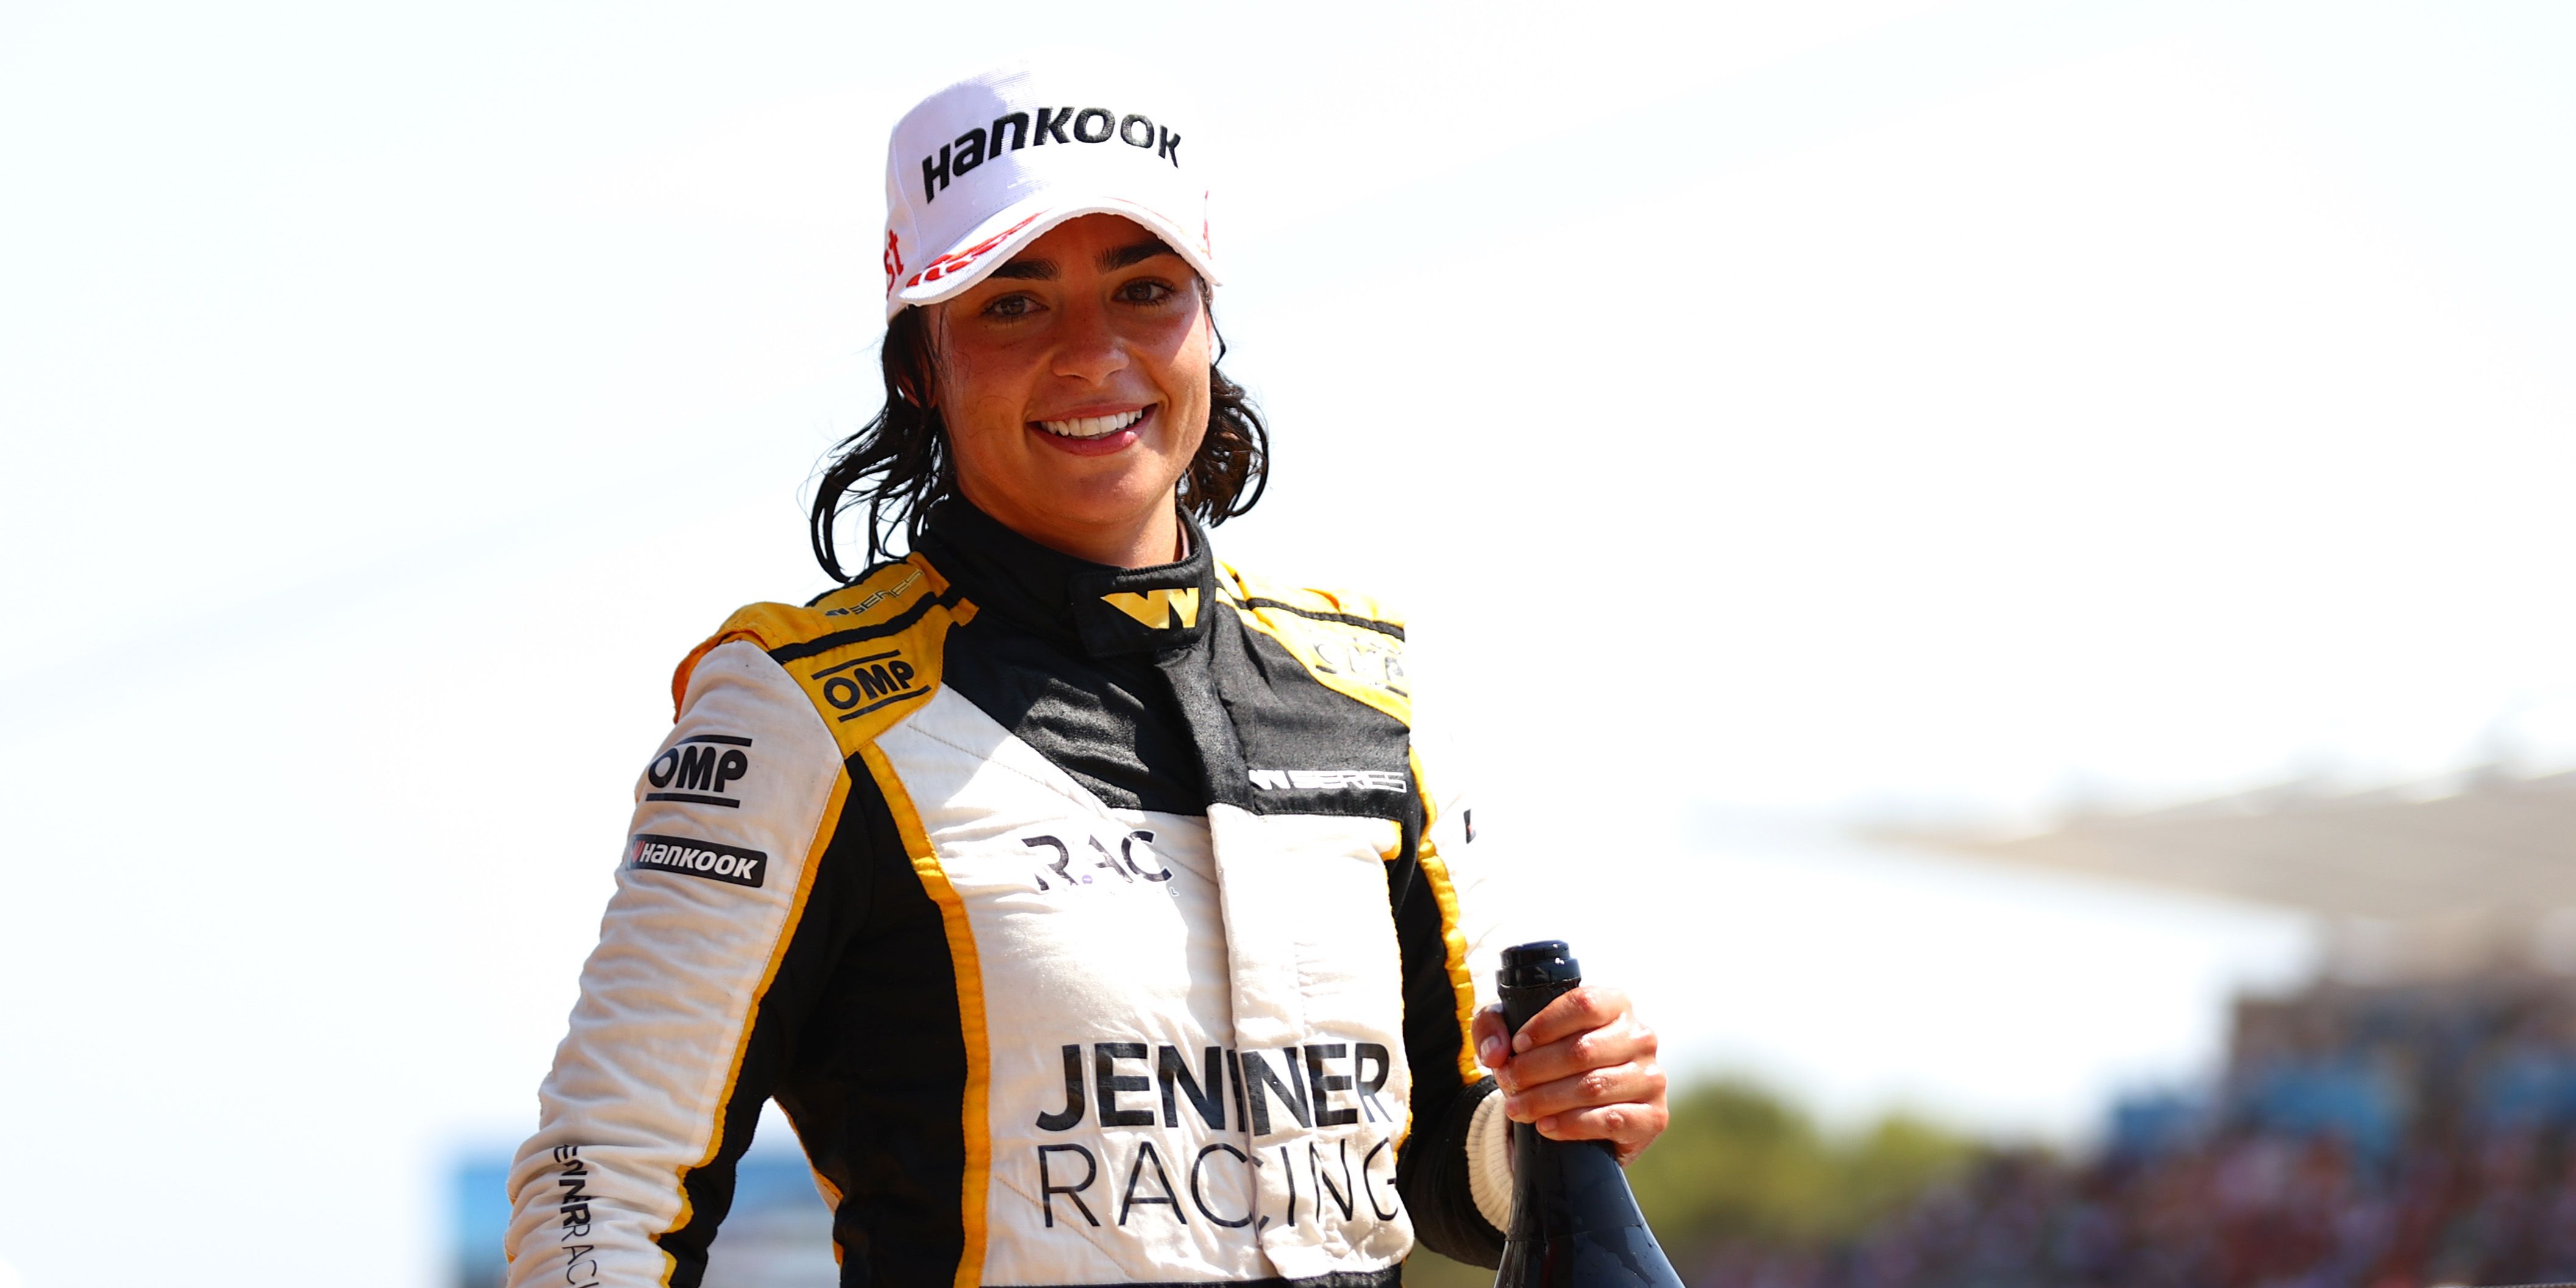 W Series Champ Jamie Chadwick to Test Indy Lights Car with Andretti